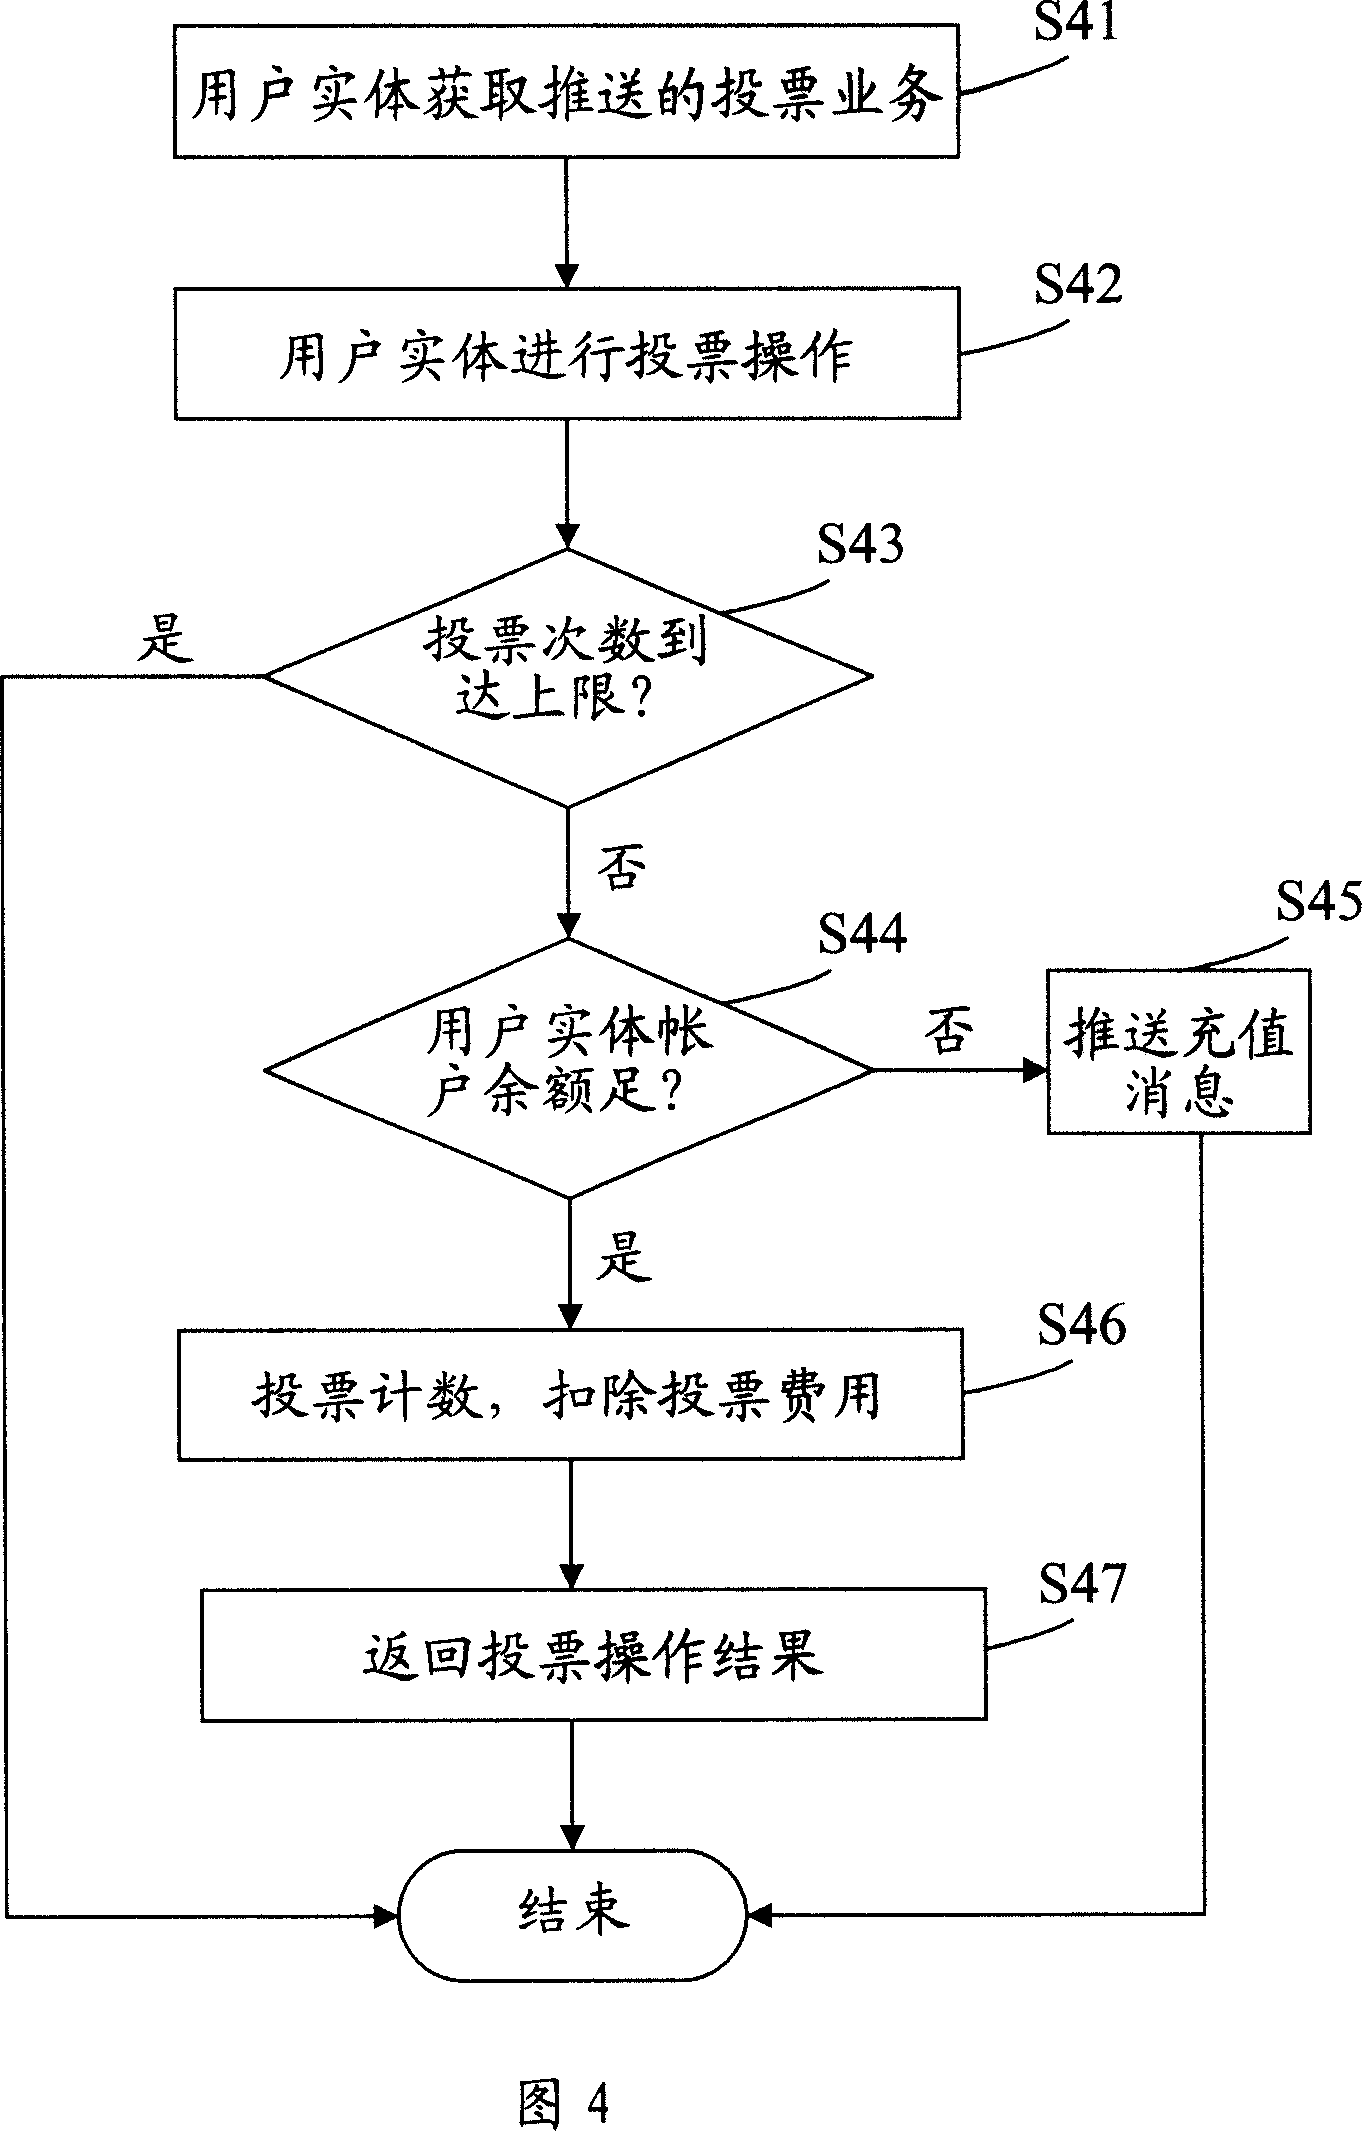 Message transmitting system and method